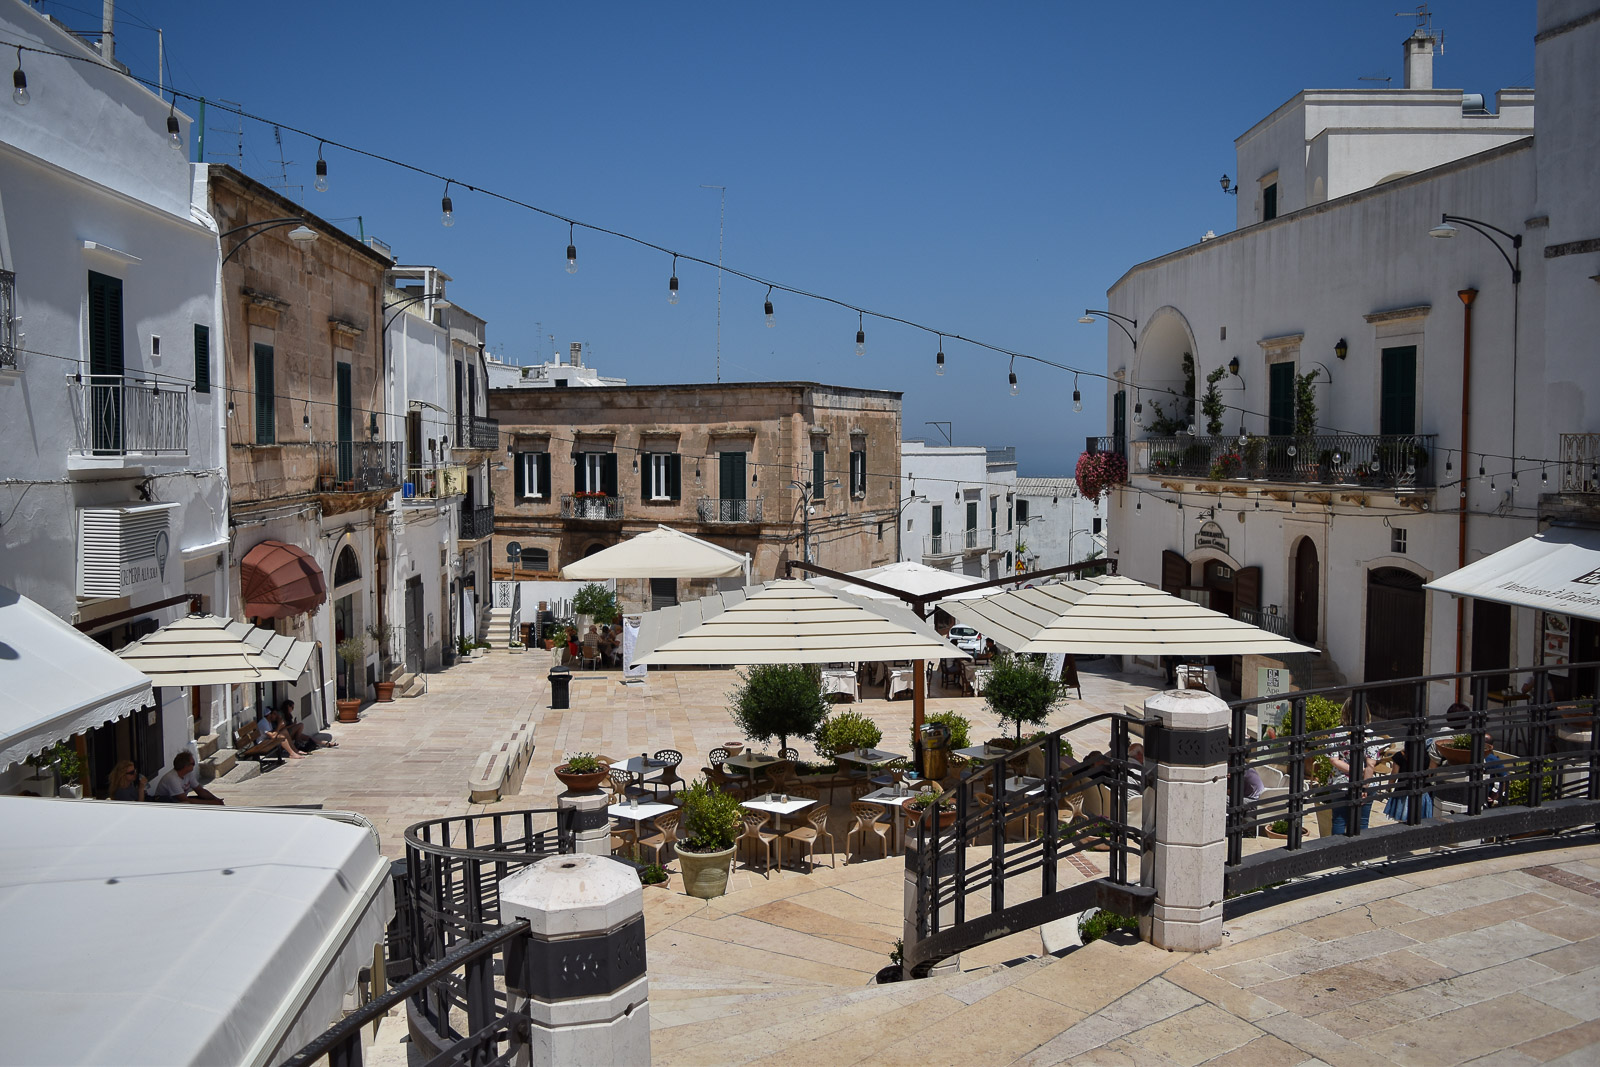 Umbrellas and tables and chairs in a piazza in Ostuni